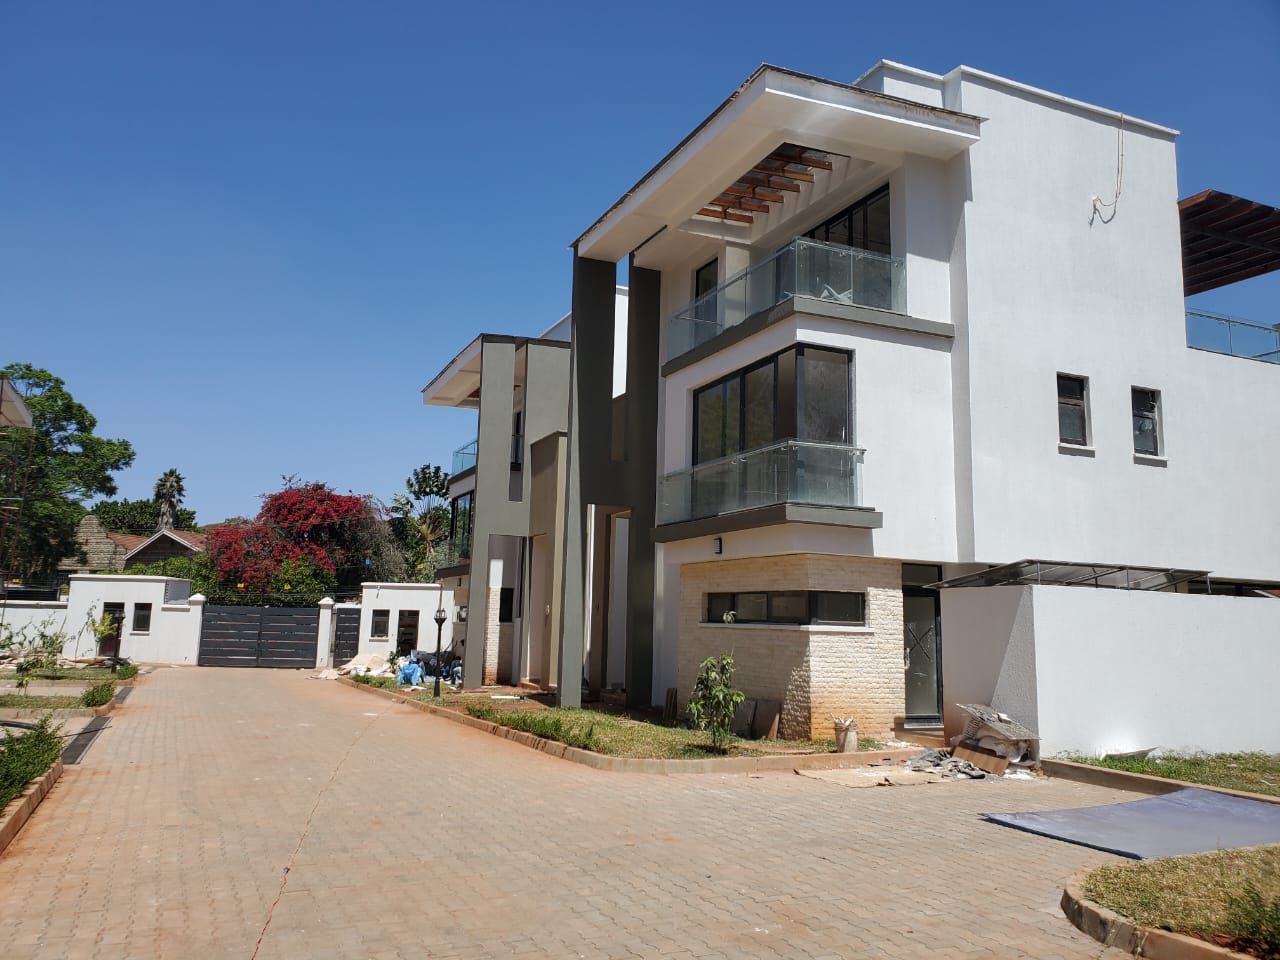 4 Bedroom Townhouses for Sale in Lavington just off James Gichuru in a gated community of 8 homes impeccably built over a 0.97 acre (3)